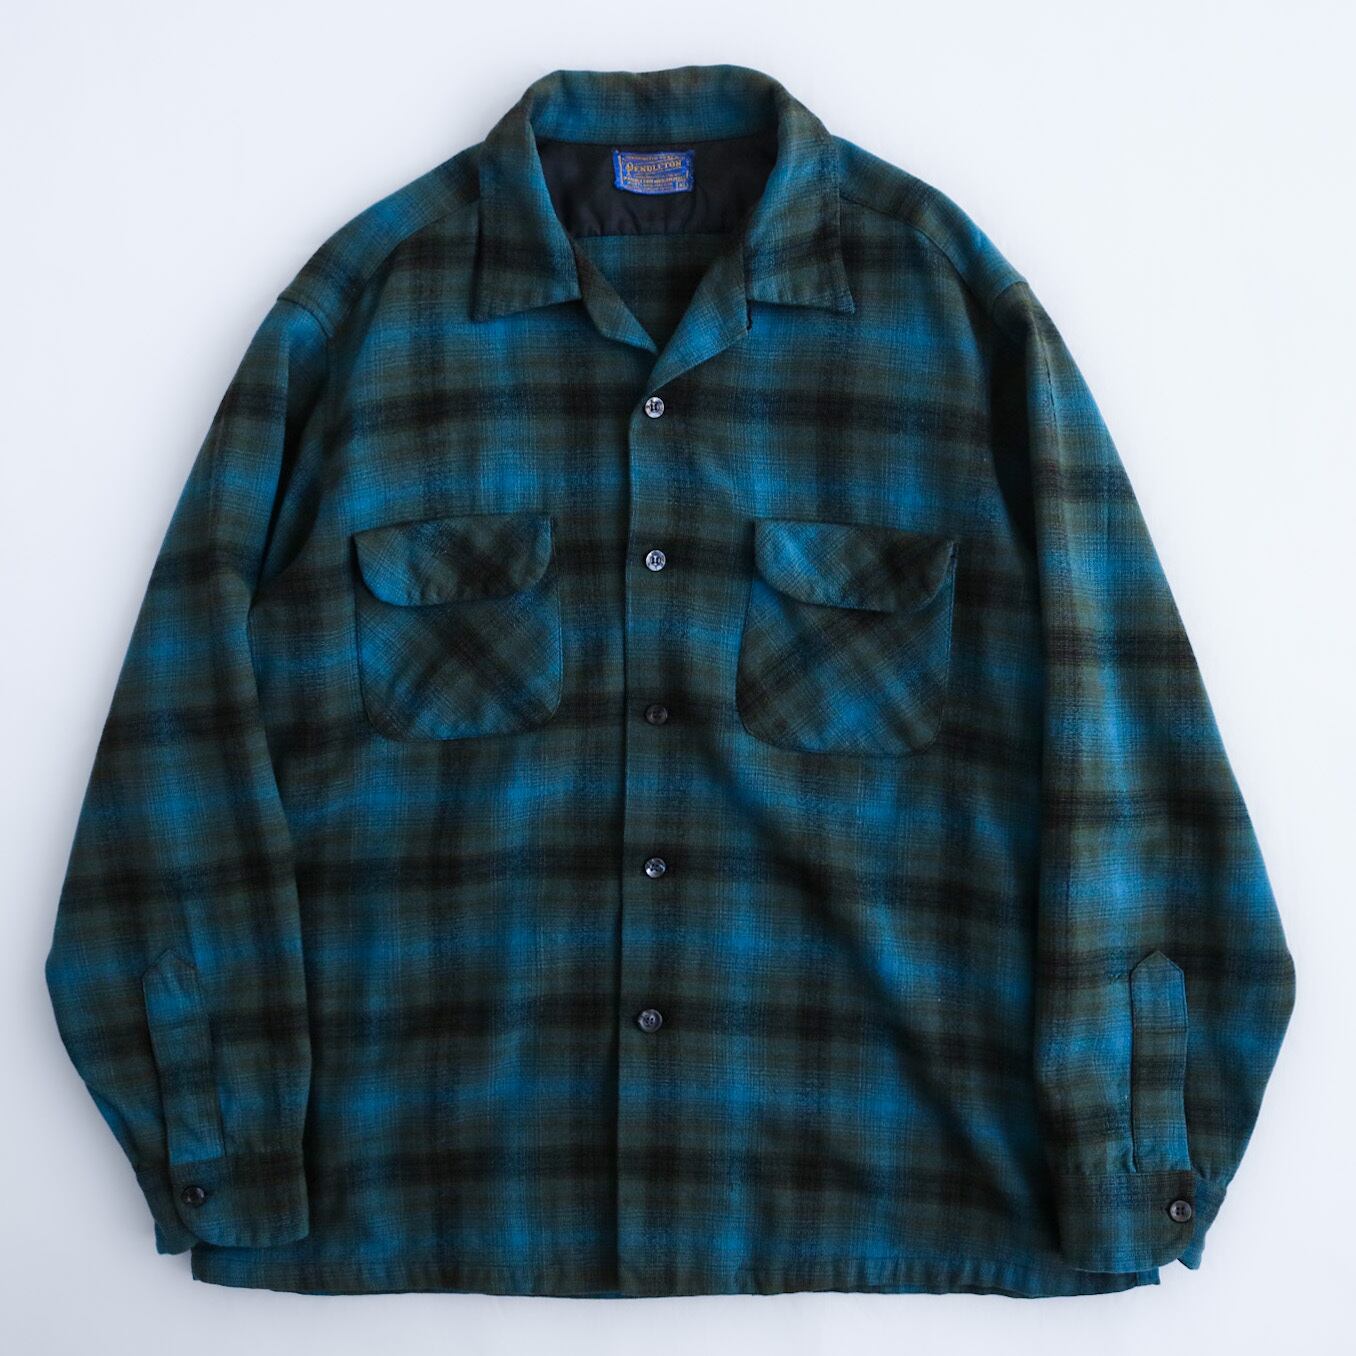 1960s “Pendleton” ombré check l/s wool shirt | JUDEE powered by BASE